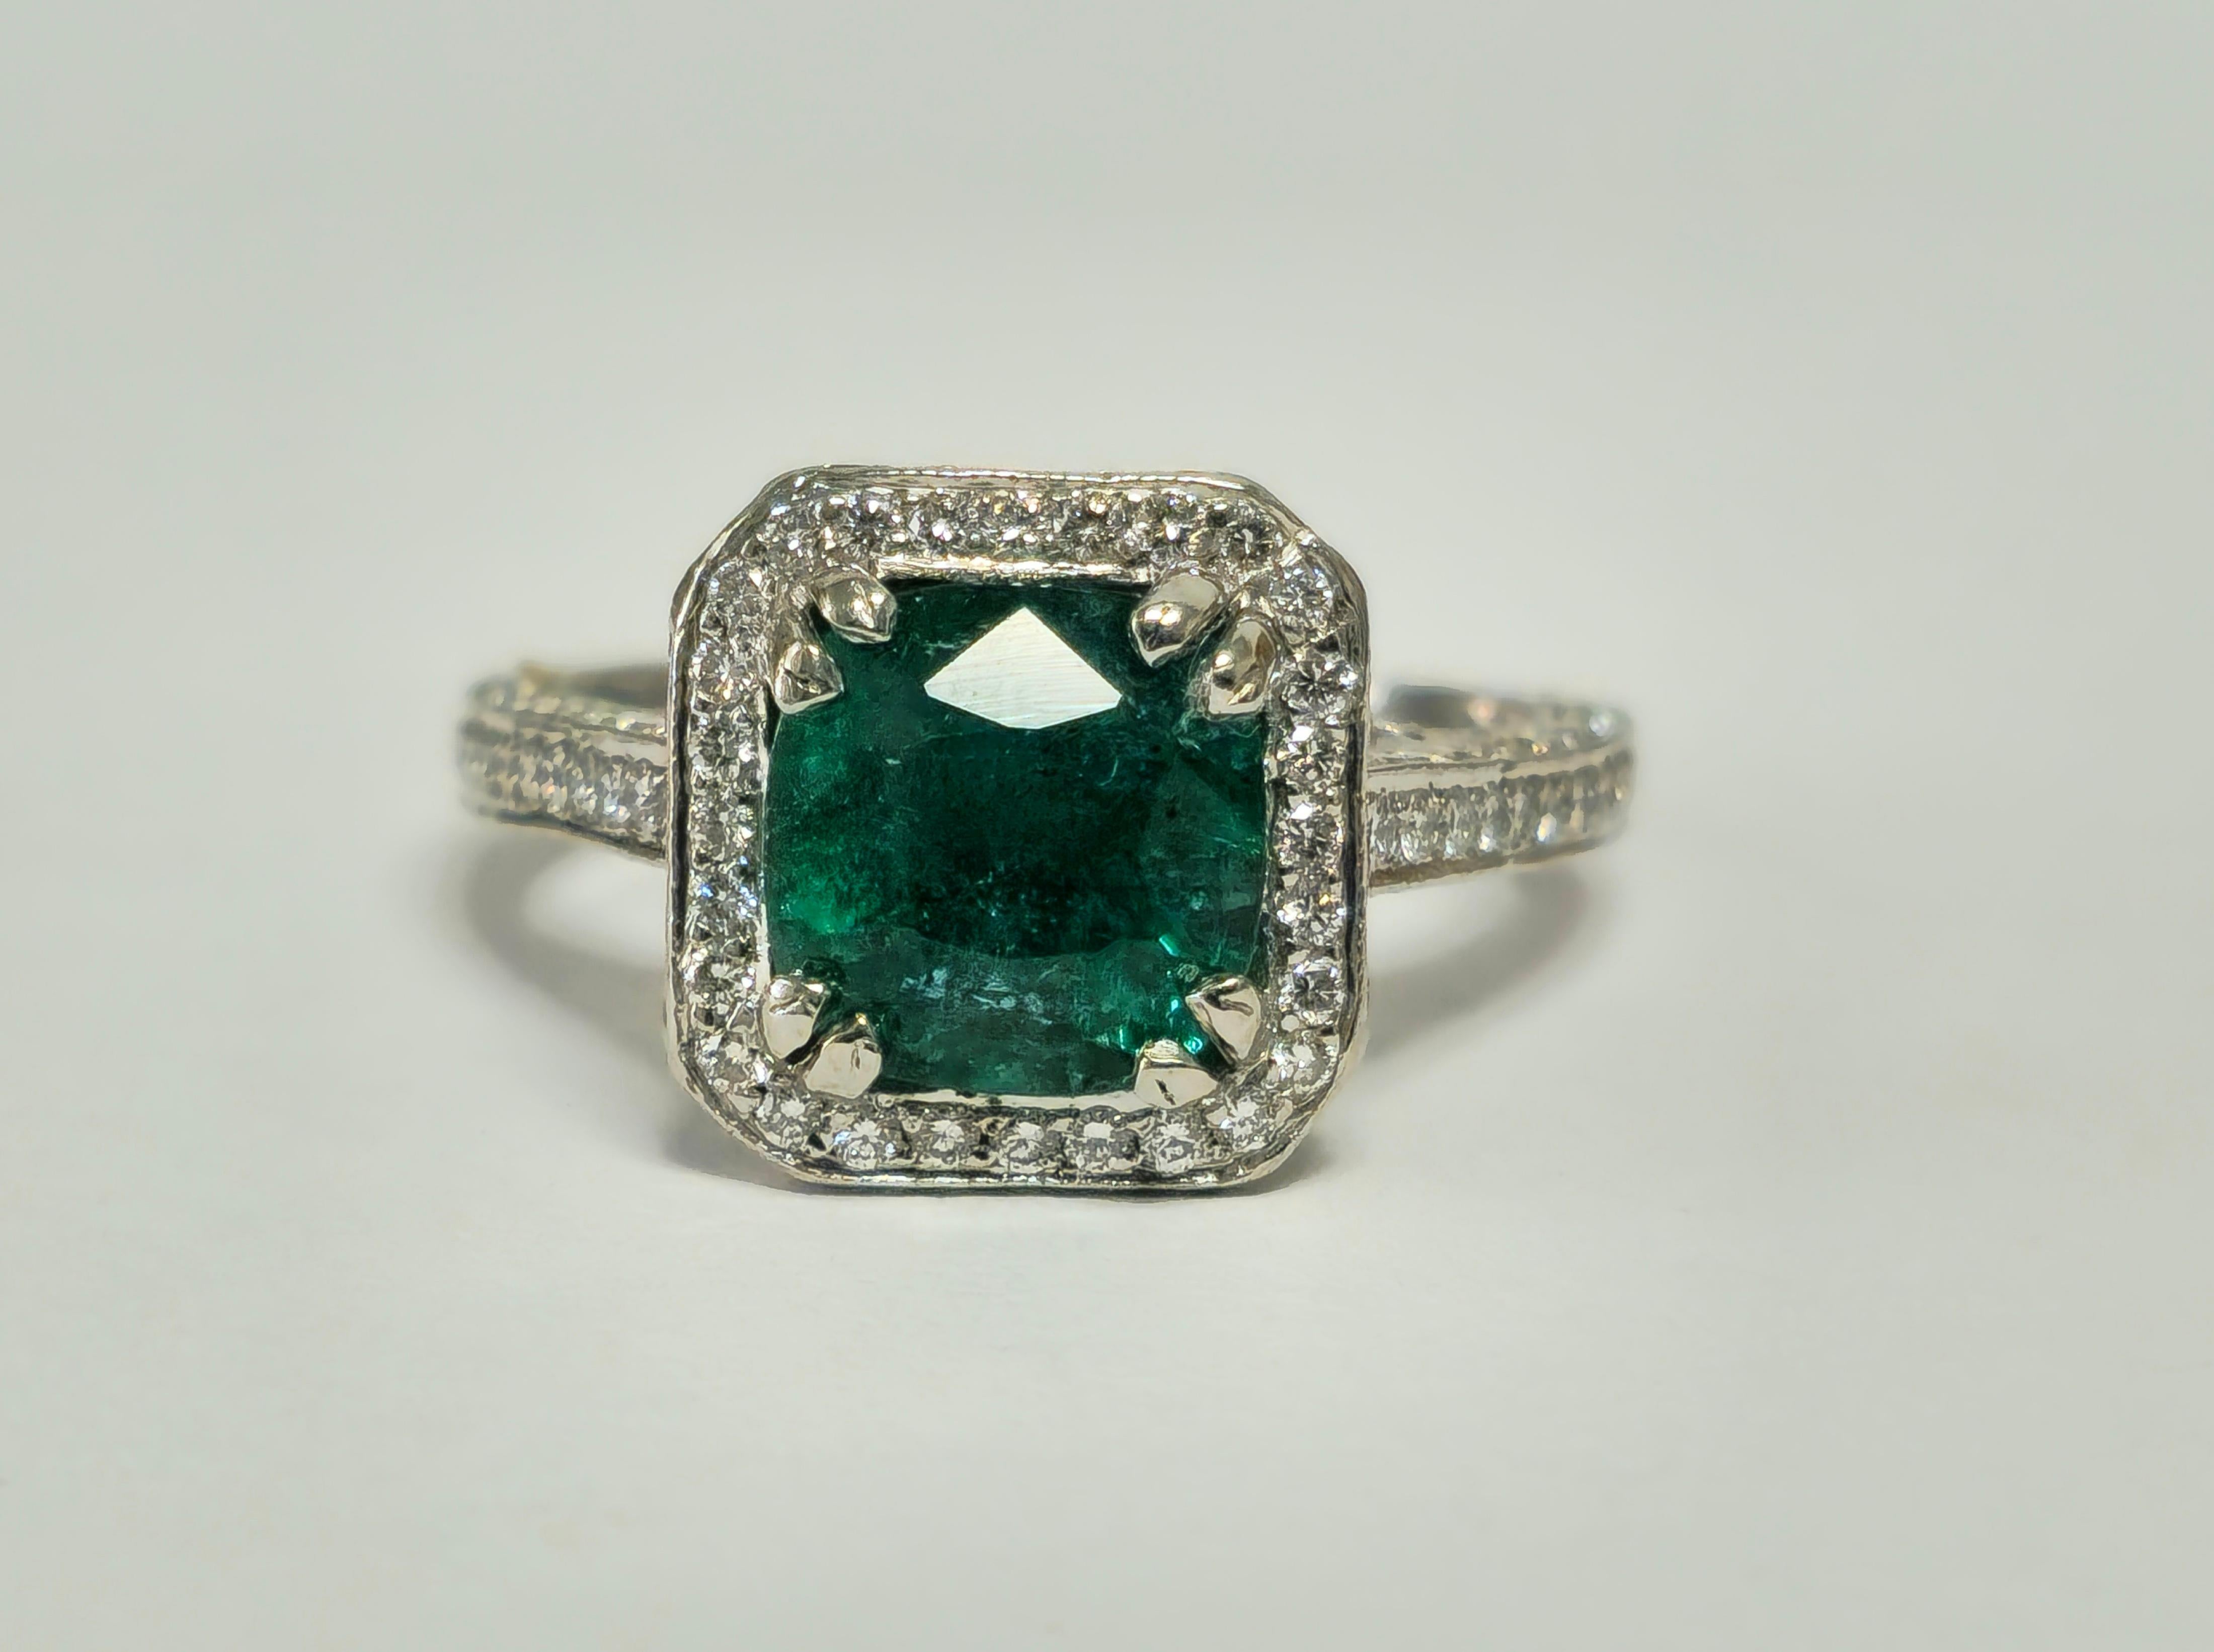 Forged in platinum, this captivating engagement ring boasts a majestic 4-carat cushion-cut emerald, exhibiting a mesmerizing deep saturation and stunning color. Accompanied by a total of 2.5 carats of diamonds, renowned for their VS clarity and F